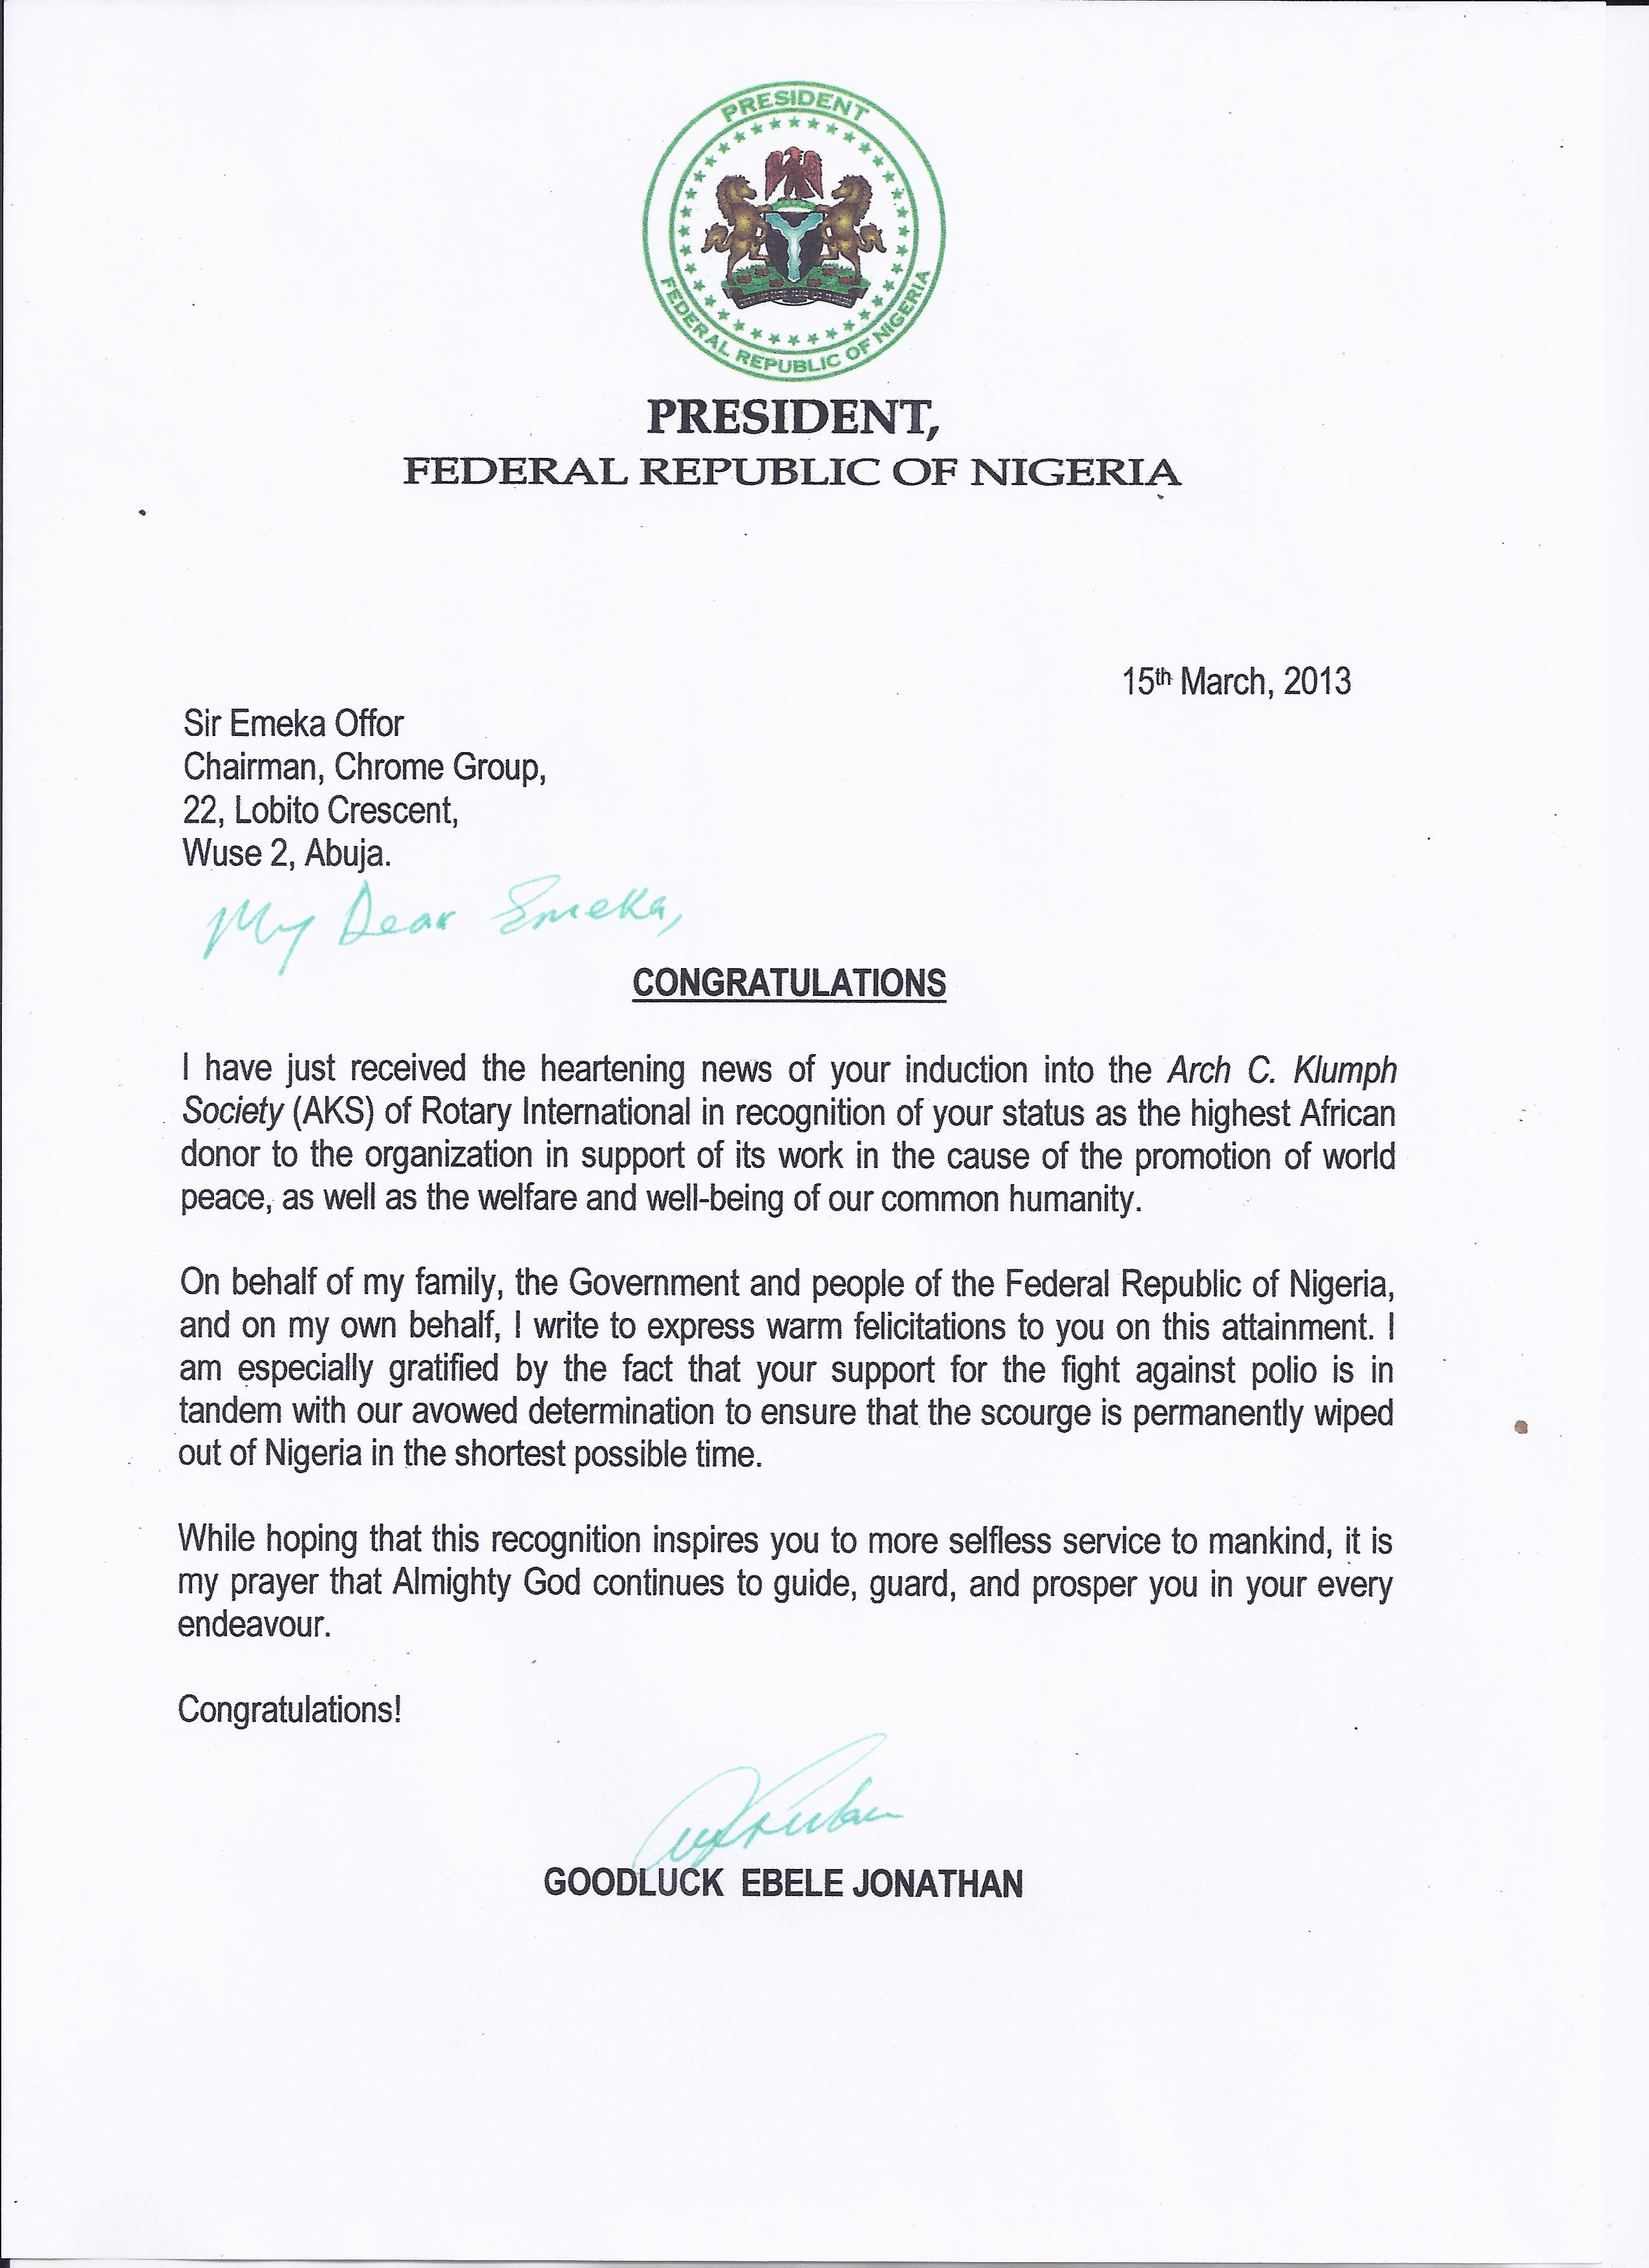 Letter of Congratulations from President Goodluck Jonathan